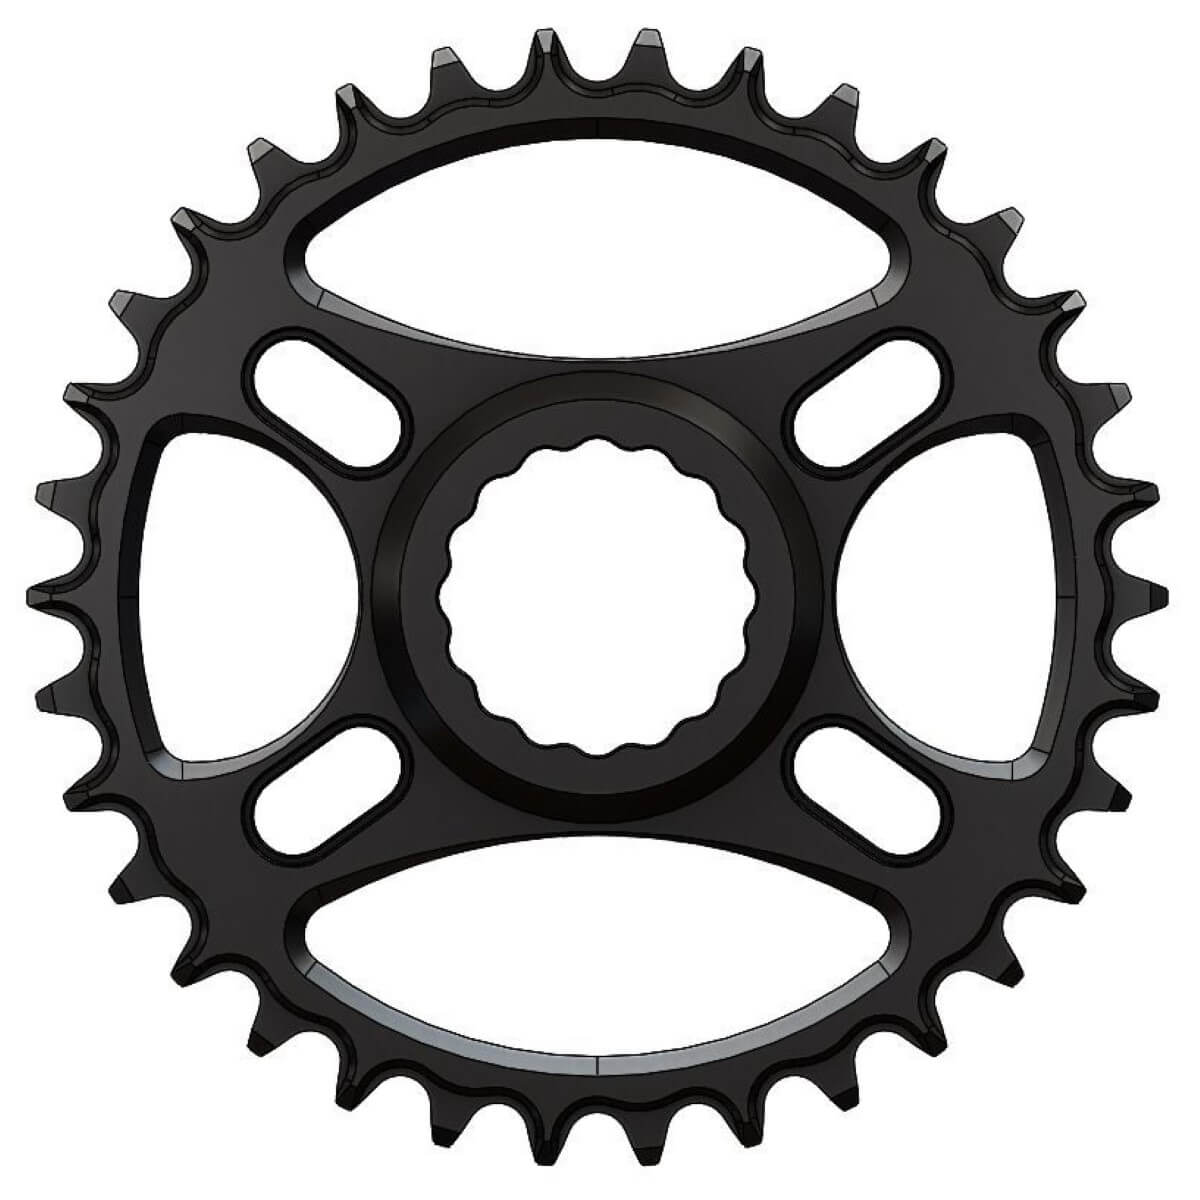 Pilo C69 Chainring Narrow Wide 34T for Race Face direct mount.  Hyperglide+ Compatible